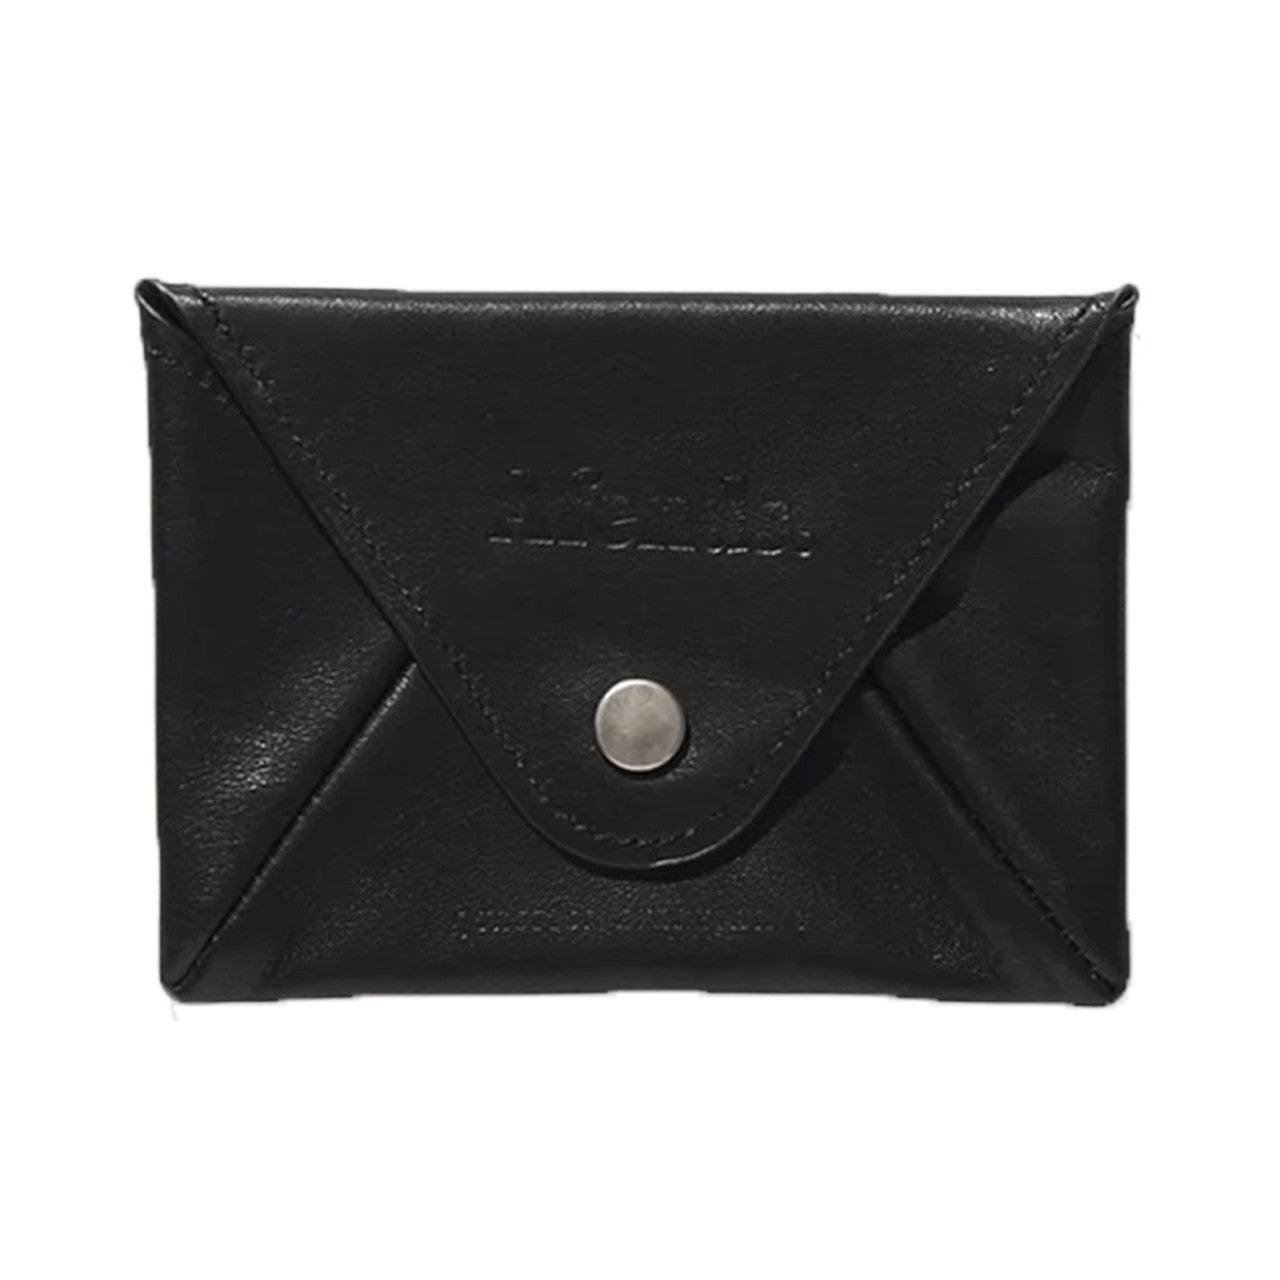 HOLDALL LEATHER POUCH WALLET